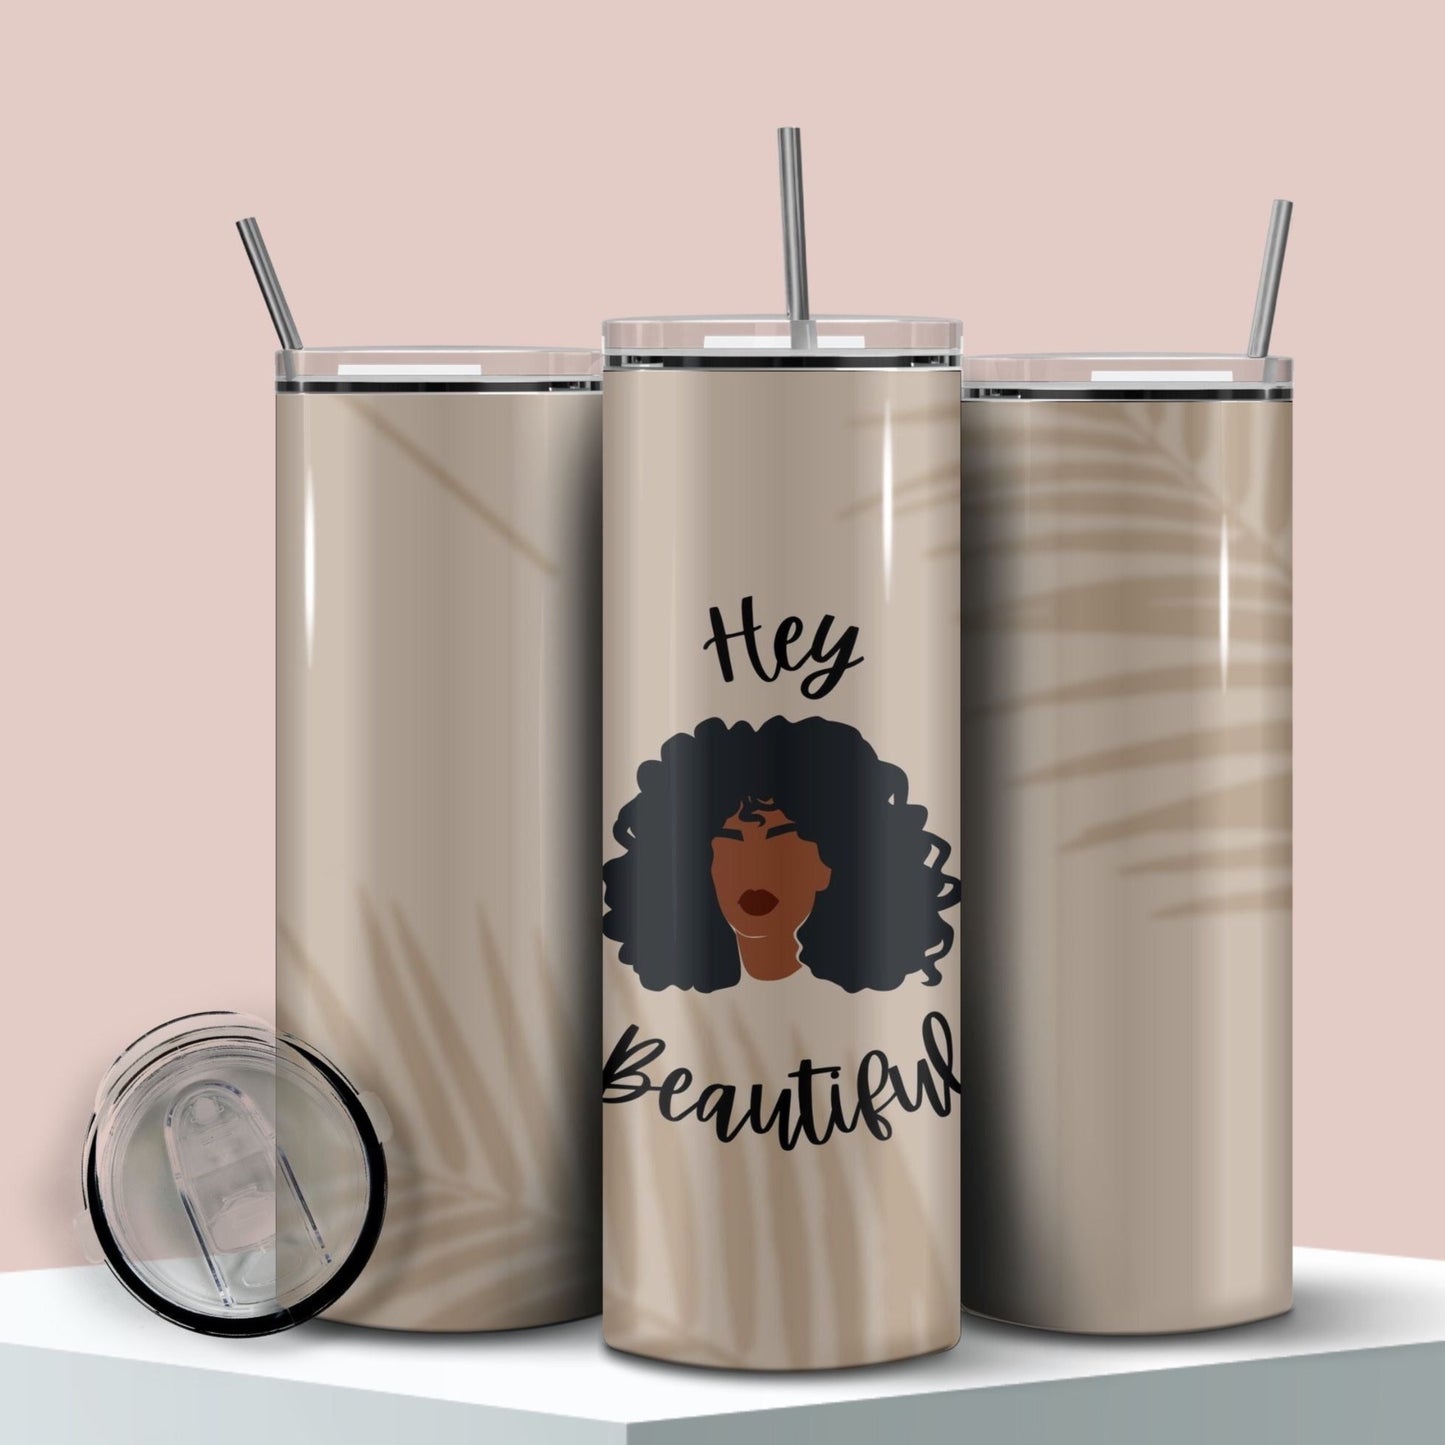 Hey Beautiful Tumbler for Black Woman, Positive Affirmation Travel Coffee Cup; Therapist Gift Idea